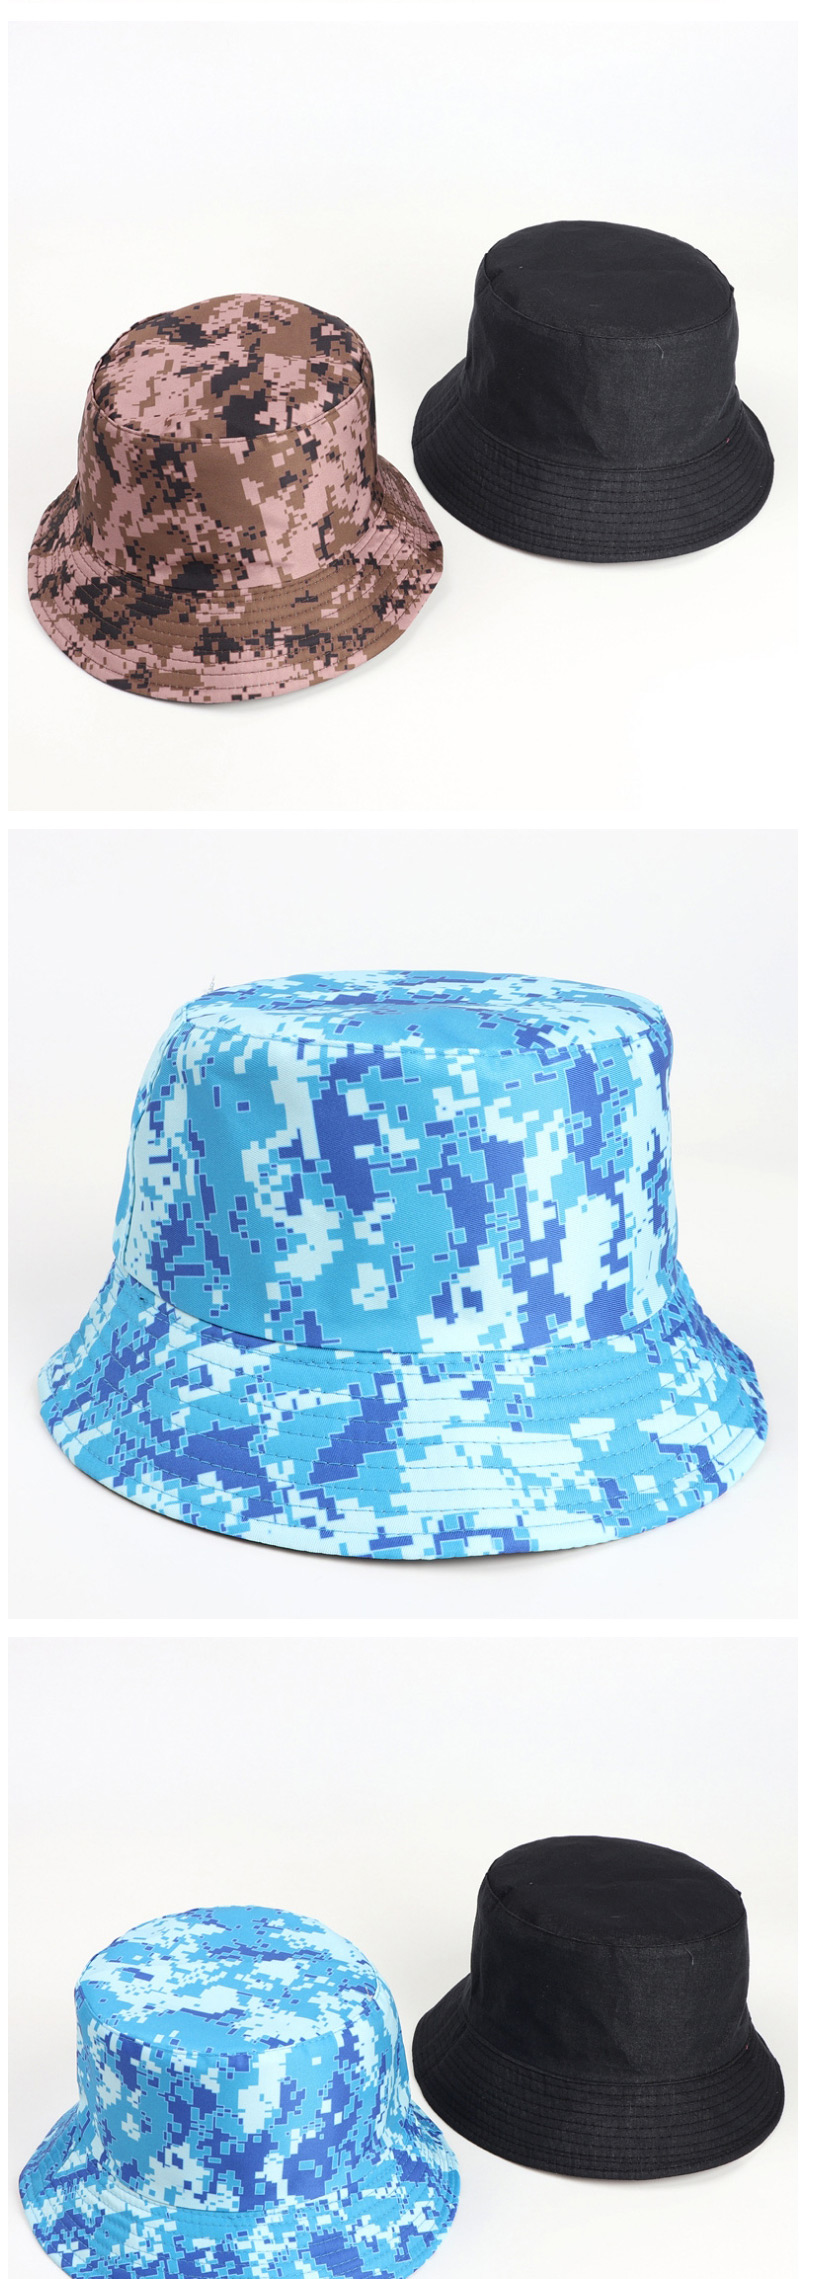 Fashion Digital Camouflage-coffee Printed Double-sided Multicolor Camouflage Fisherman Hat,Sun Hats